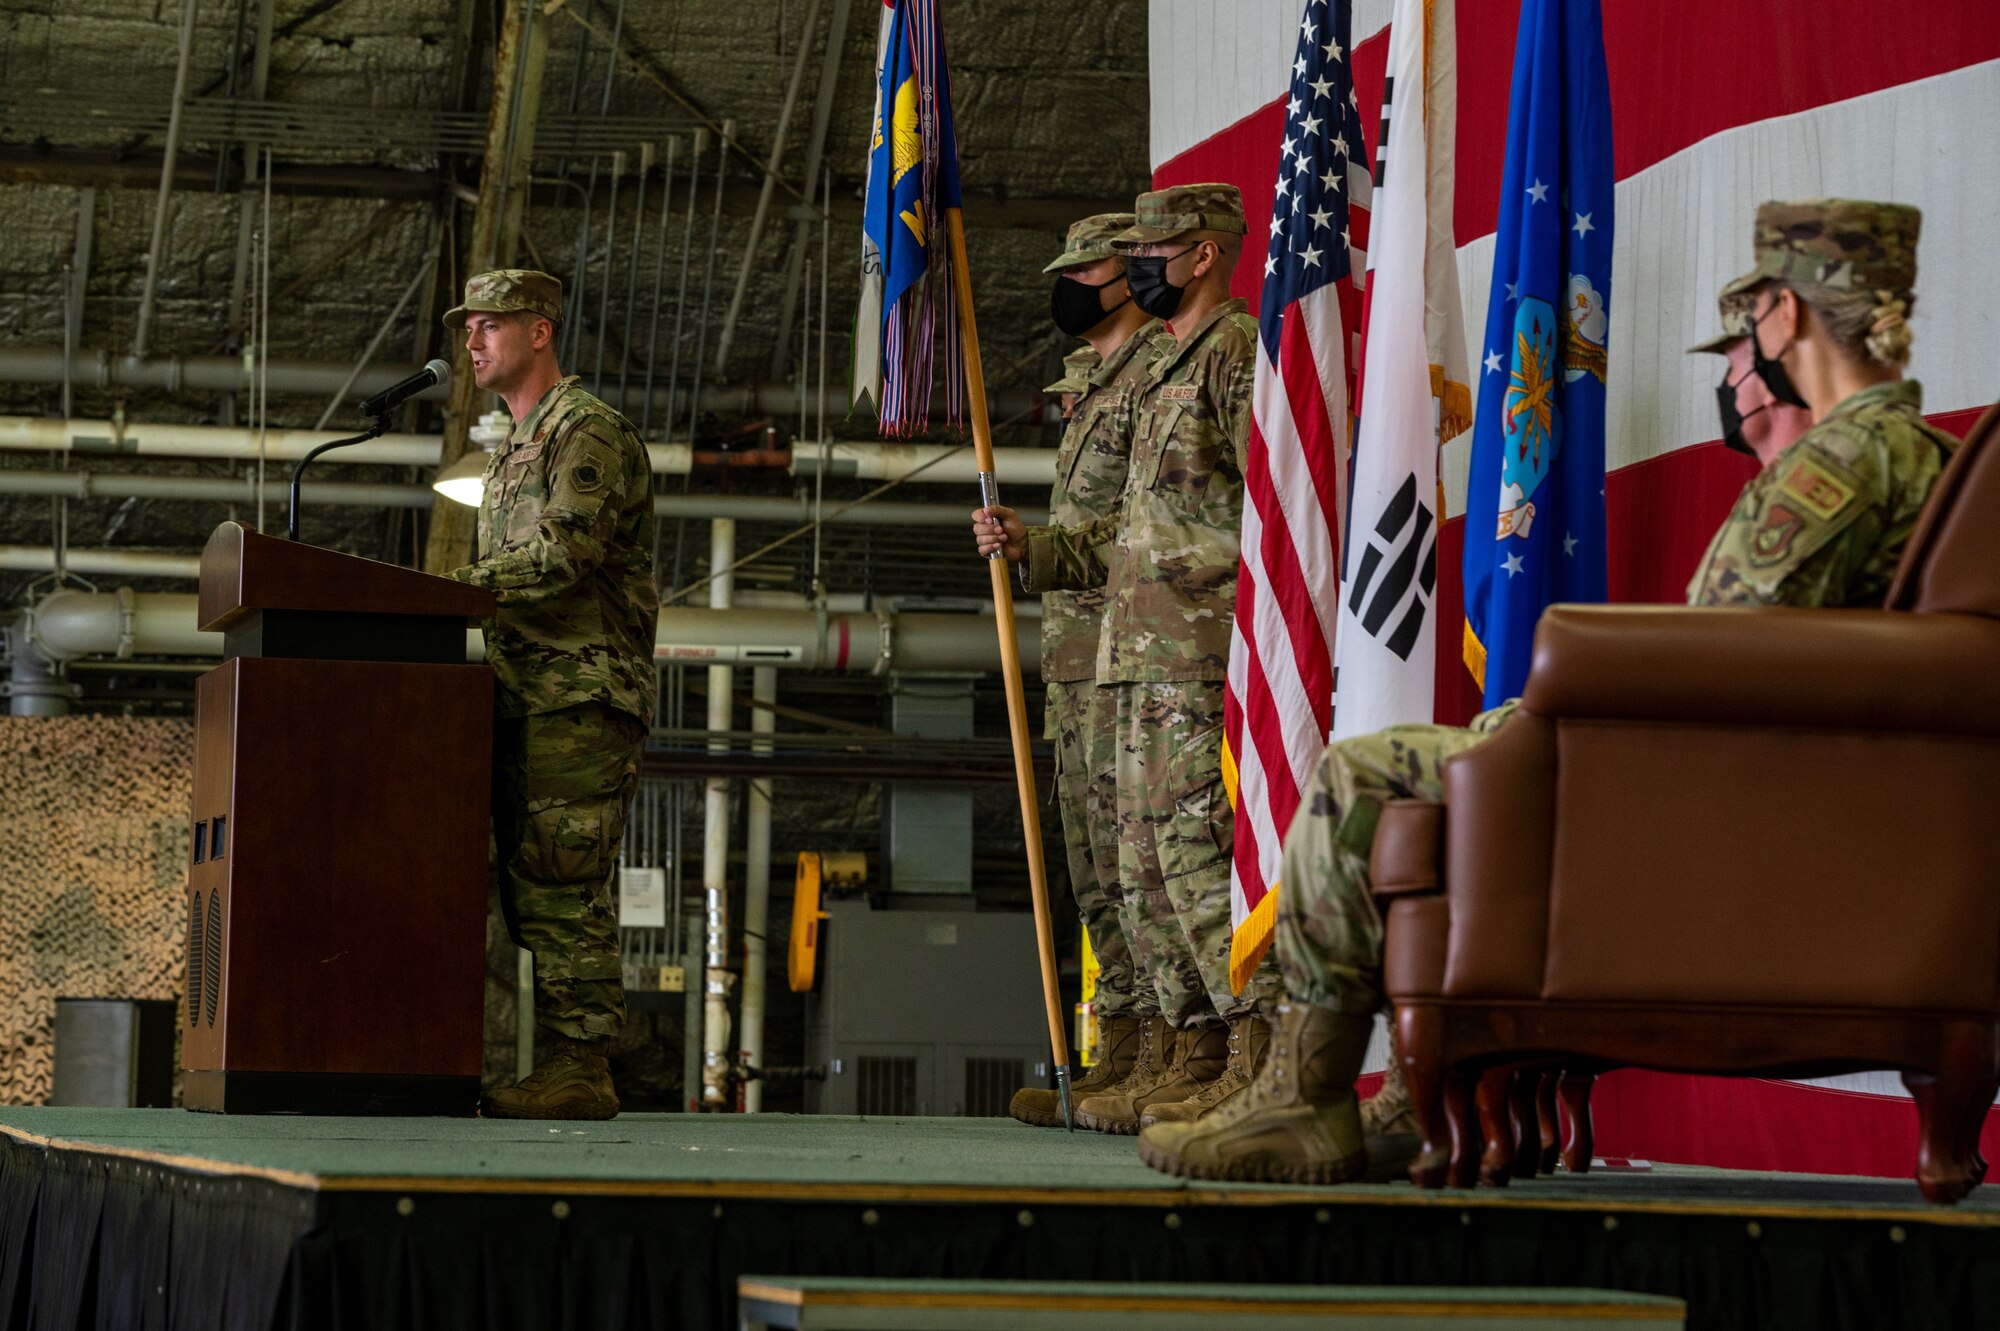 Col. Michael Fea, 51st Medical Group outgoing commander and Col. Jennifer Vecchione, 51st Medical Group incoming commander, listen to opening remarks from Col. Joshua Wood, 51st Fighter Wing commander, left, during the 51st Medical Group change of command ceremony at Osan Air Base, Republic of Korea, July 12, 2021. As the presiding officer, Wood facilitated the transition of 51st MDG command. (U.S. Air Force photo by Tech. Sgt. Nicholas Alder)